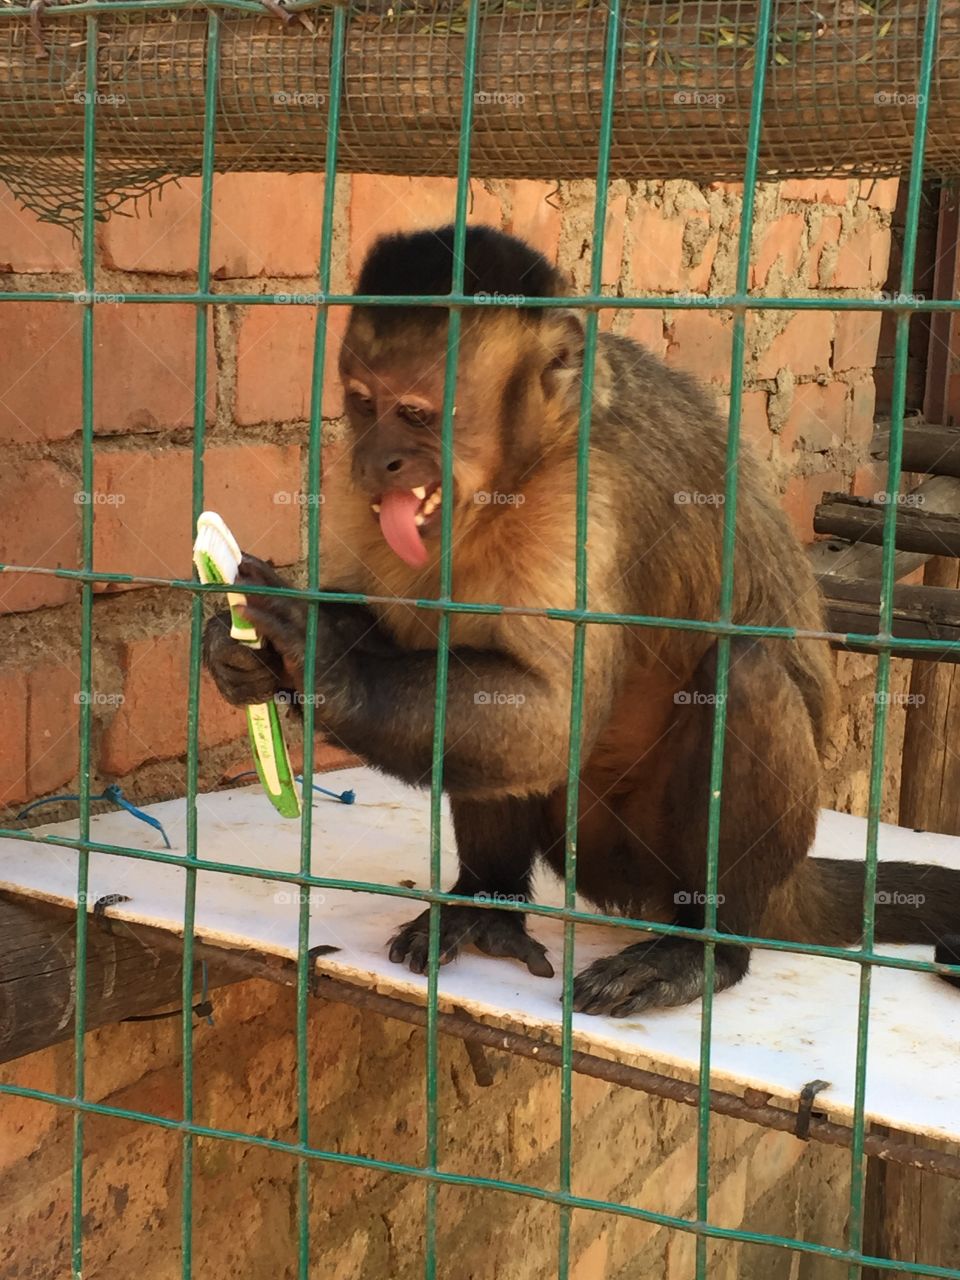 Capuchin with toothbrush